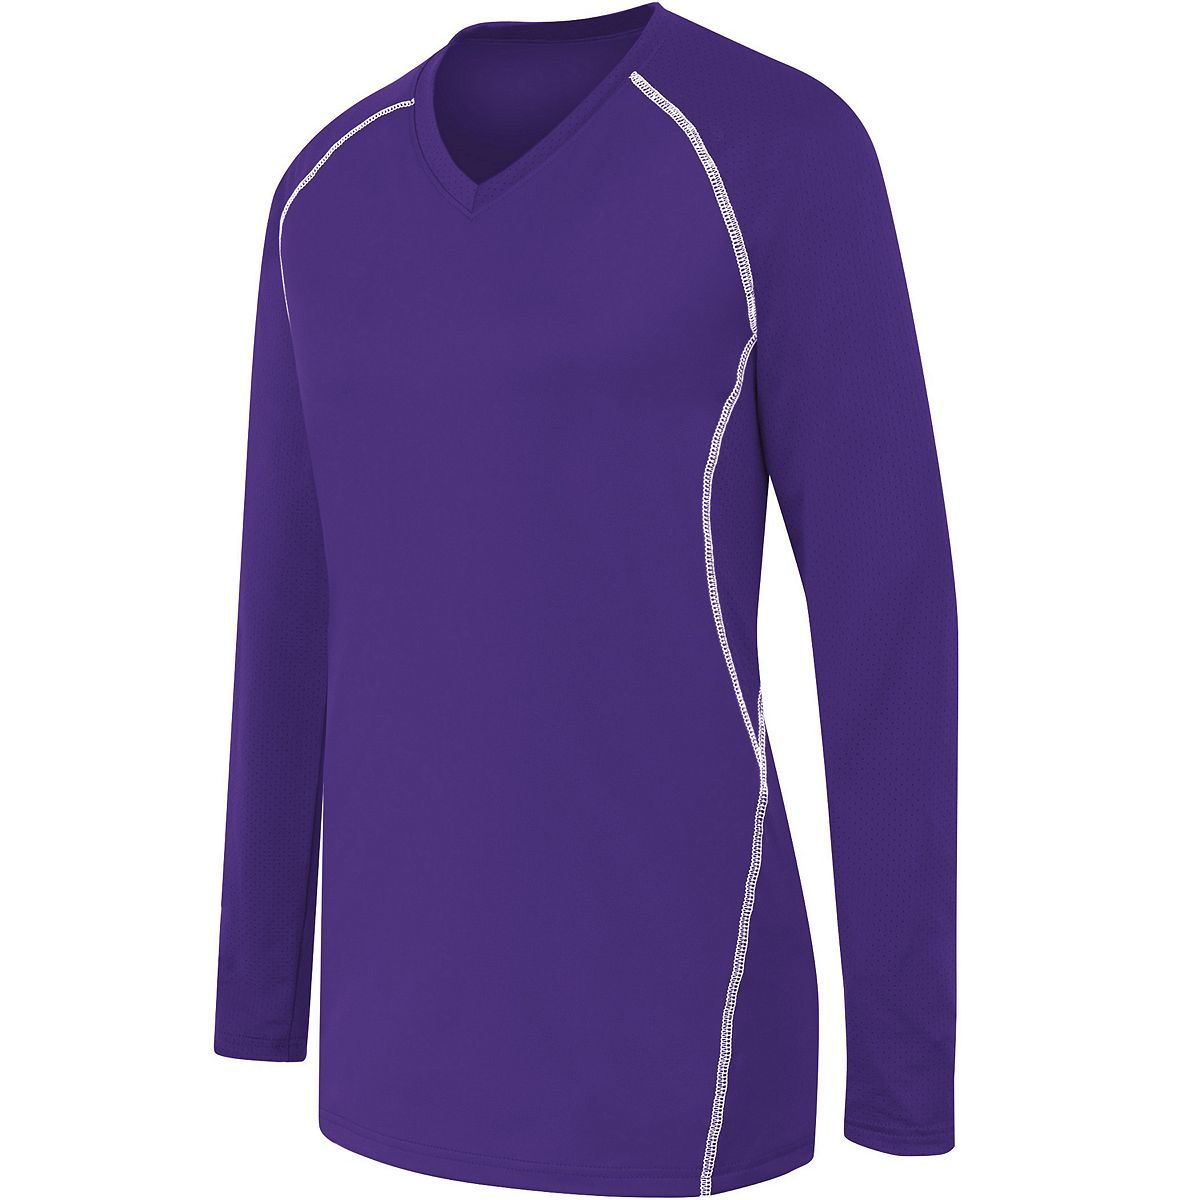 High 5 Ladies Long Sleeve Solid Jersey in Purple/White  -Part of the Ladies, Ladies-Jersey, High5-Products, Volleyball, Shirts product lines at KanaleyCreations.com